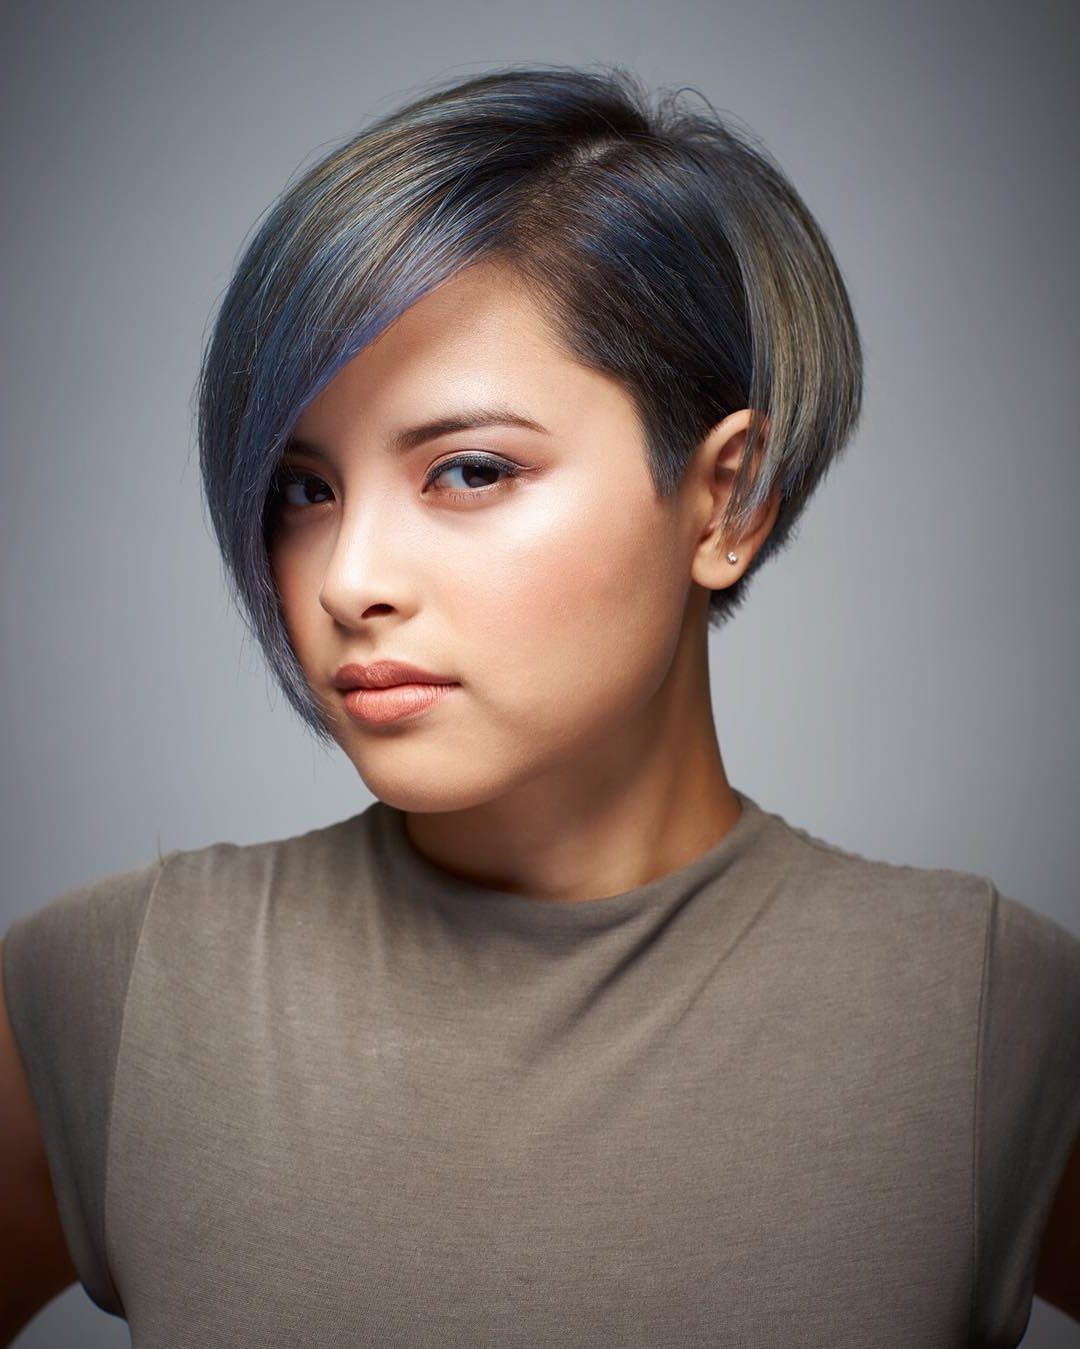 Short Hairstyles: 15 Cutest Short Haircuts For Women In 2017 With Asymmetrical Short Hairstyles (View 23 of 25)